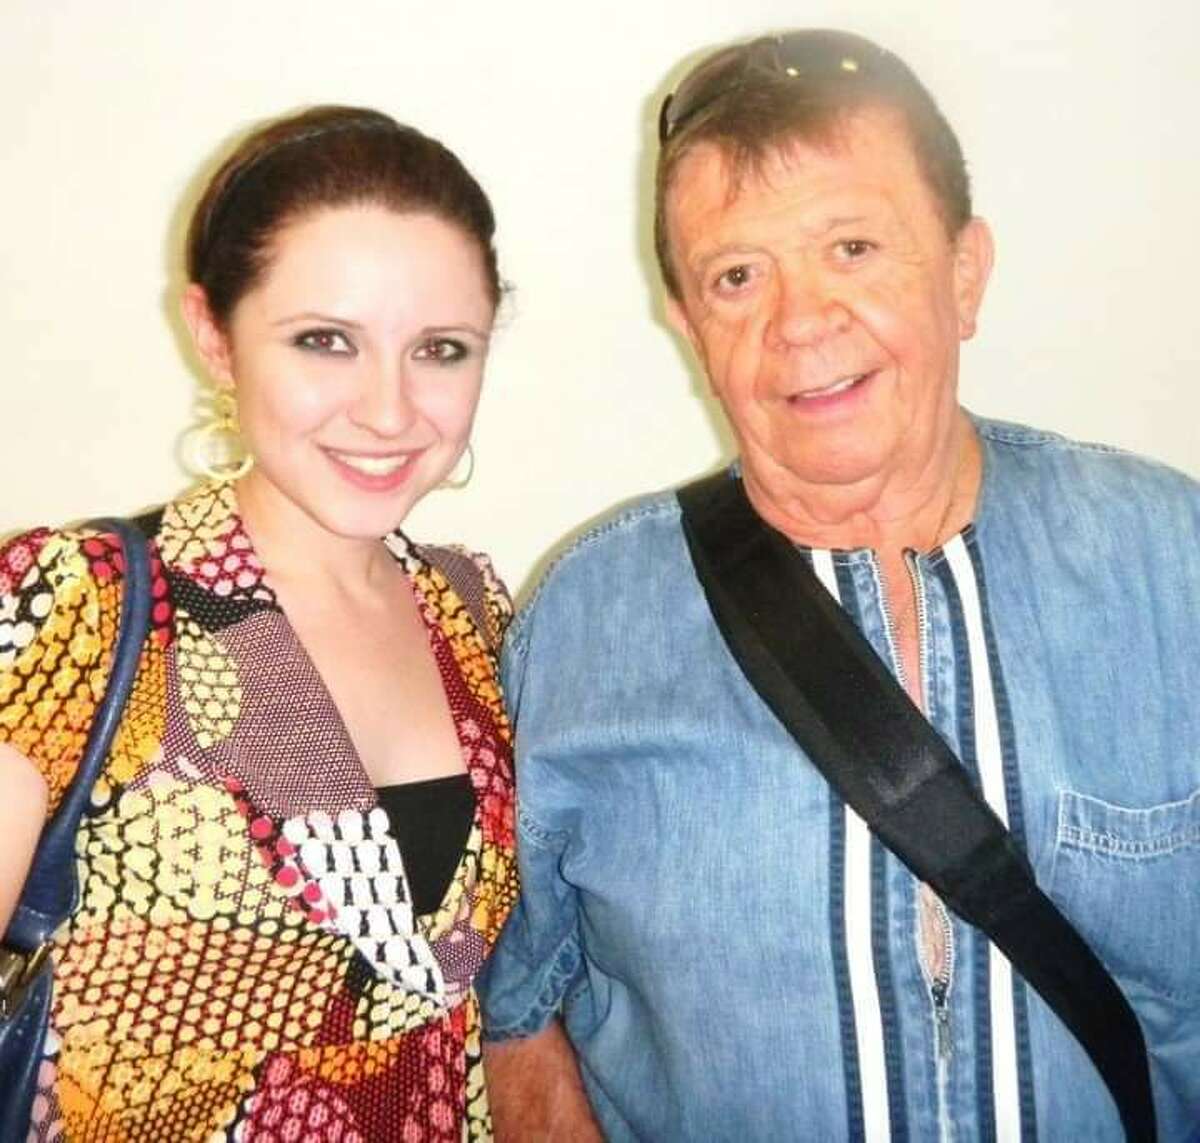 Imela Danmiguel, who is a NUevo Laredo politician, with Chabelo. People from the Dos Laredos immediately took to social media to voice their sadness about his loss and what it meant watching him in his famous television show “En Familia con Chabelo" which aired for close to 50 years starting in 1967 until its final show transmission on Dec. 20, 2015. 